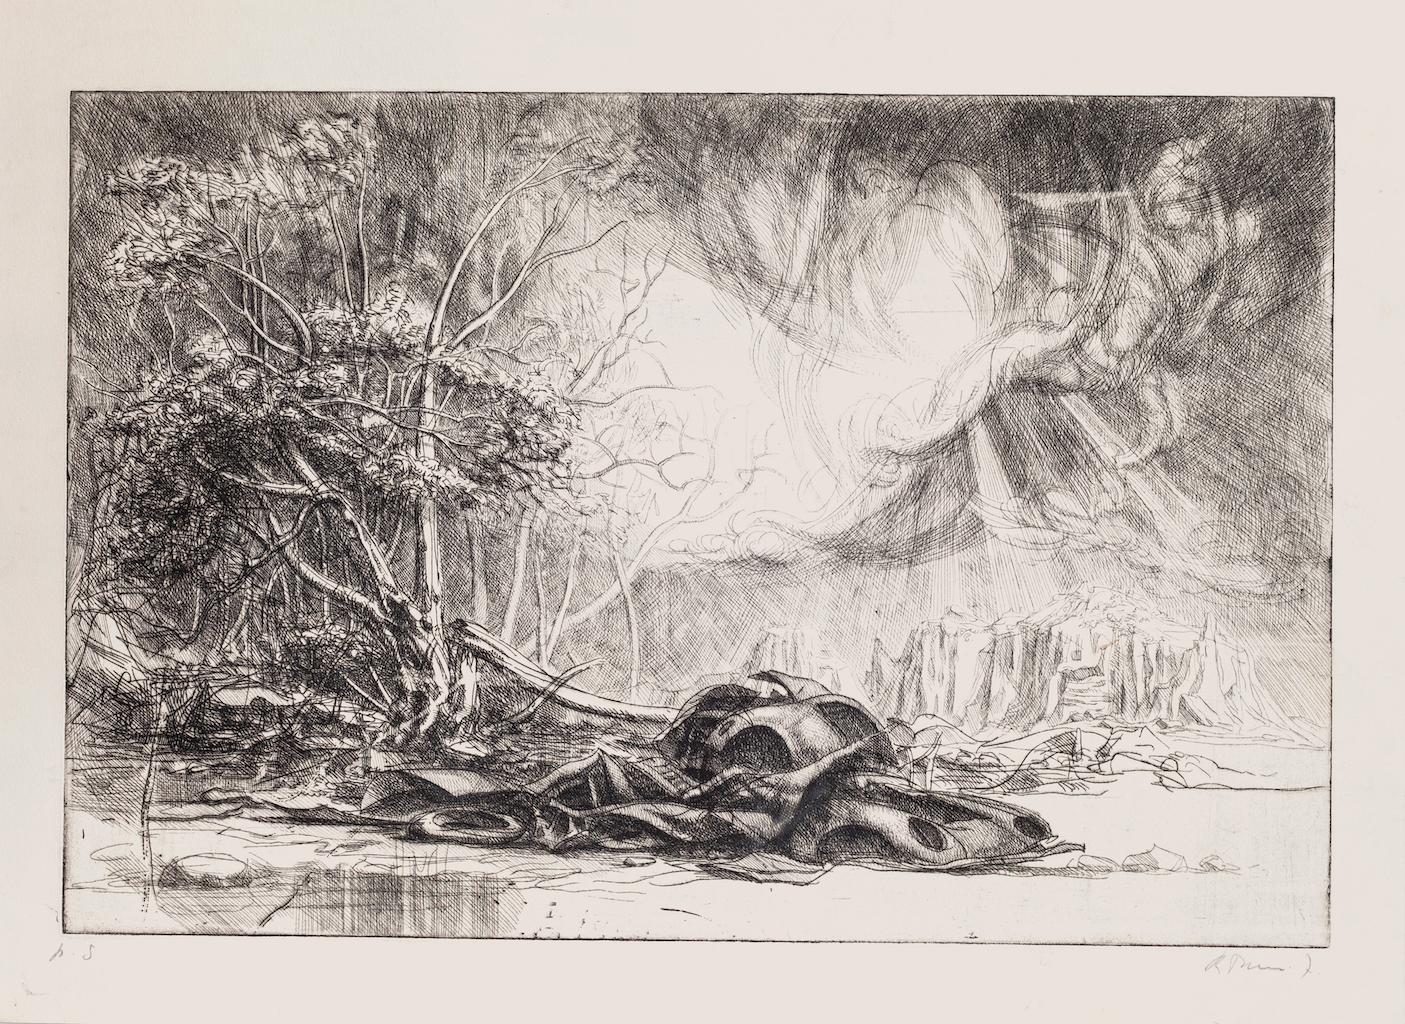 Nature Prevails - Original Etching by Riccardo Tommasi Ferroni - 1970s